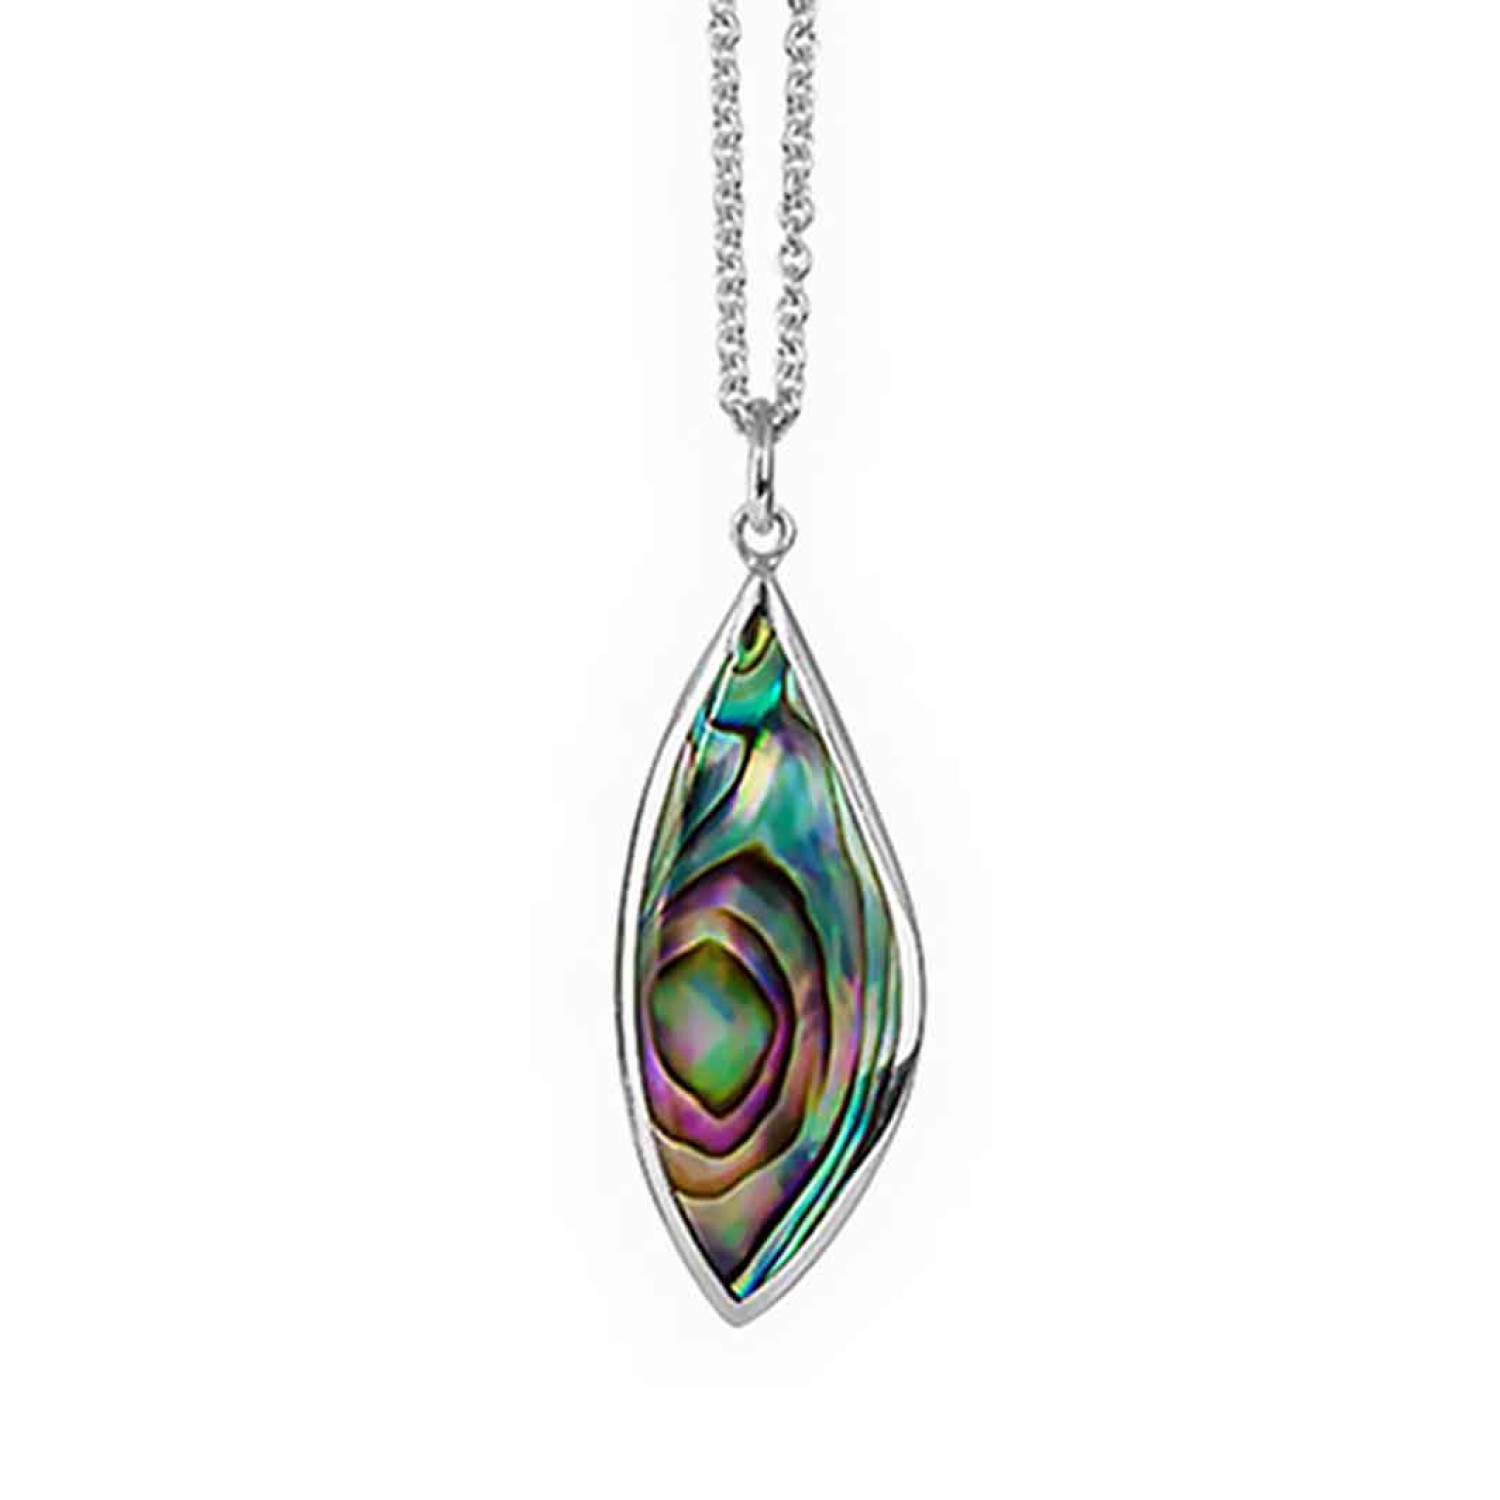 3P40004 Evolve Treasured Paua Silver Pendant. The New Zealand pāua shell is the most exquisite and sought after in the world. Each treasured pāua piece is unique and special. Magical arrays of greens and purples burst from every shell. Māori believe pāua 